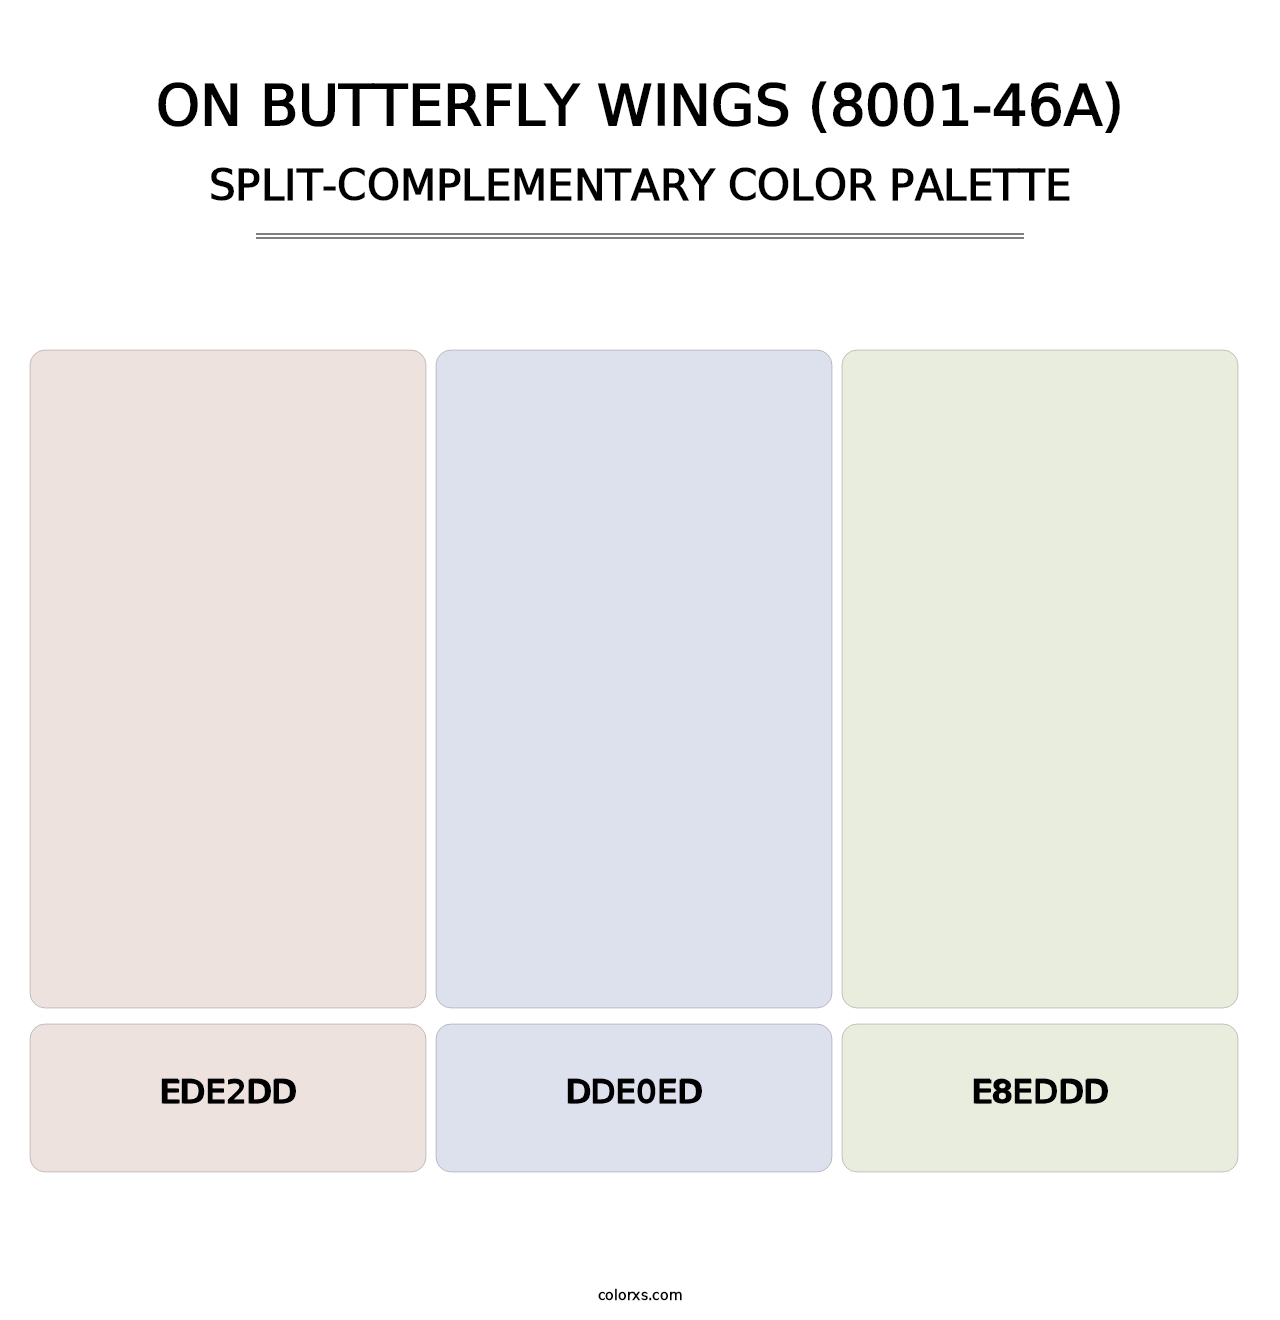 On Butterfly Wings (8001-46A) - Split-Complementary Color Palette